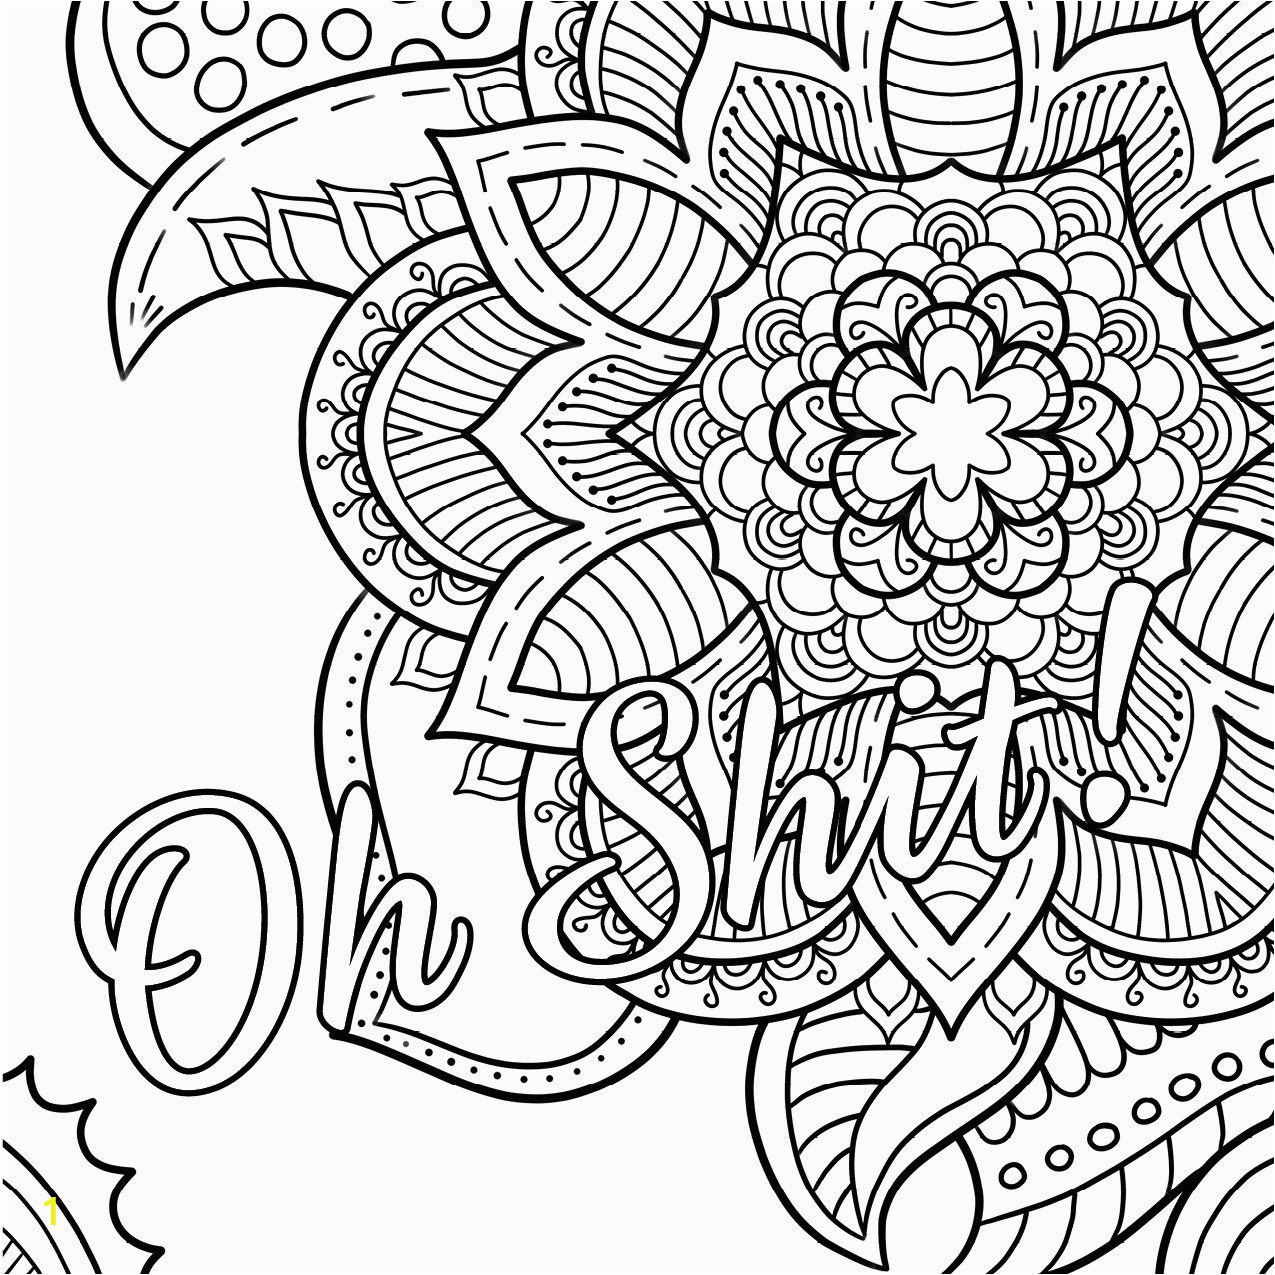 Free Printable Coloring Book Pages for Adults Swear Words Swear Word Coloring Book 2 Free Printable Coloring Pages